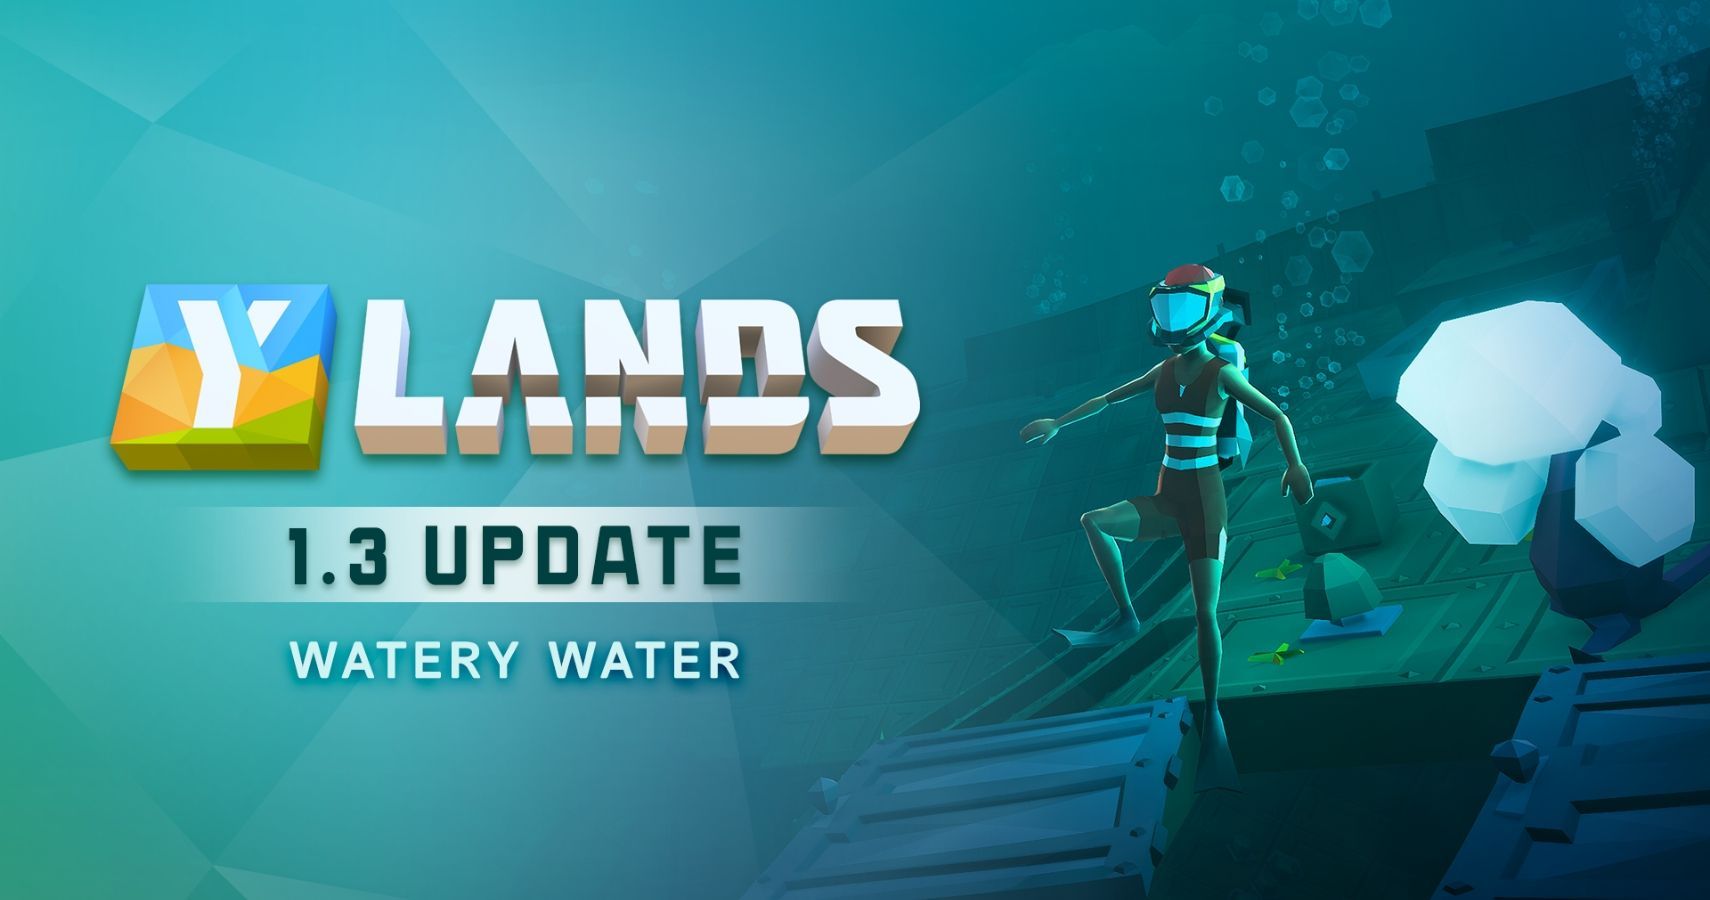 download the last version for android Ylands